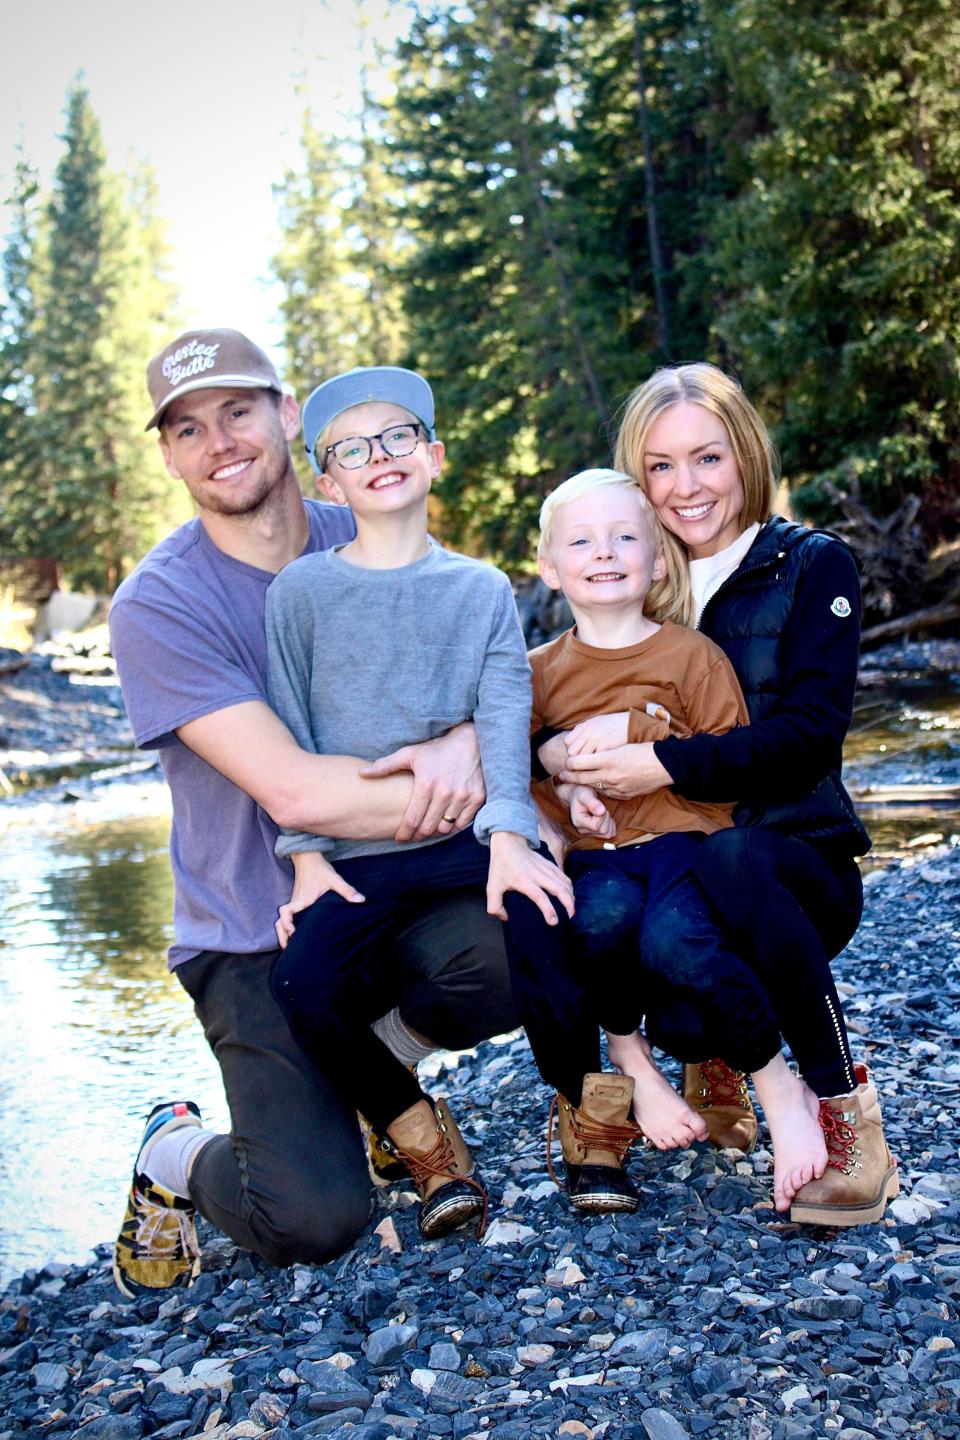 Cameron Clifford pictured with his wife and their sons, from left to right, Cal and Lyle.